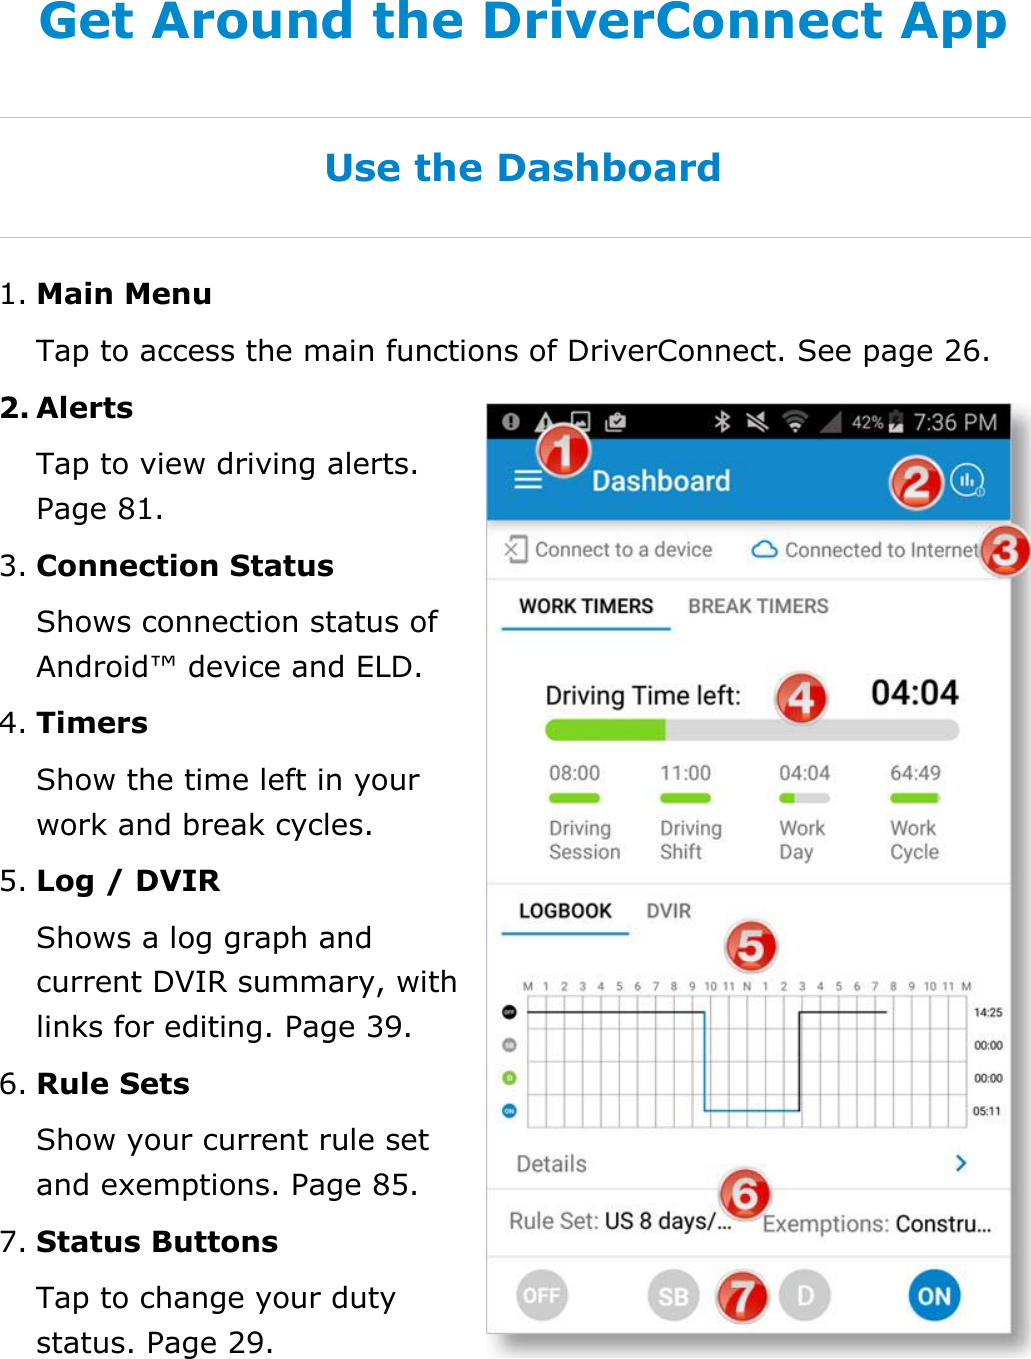 Set My Duty Status DriverConnect User Guide  21 © 2017, Rand McNally, Inc. Get Around the DriverConnect App Use the Dashboard 1. Main Menu Tap to access the main functions of DriverConnect. See page 26. 2. Alerts Tap to view driving alerts. Page 81. 3. Connection Status Shows connection status of Android™ device and ELD. 4. Timers Show the time left in your work and break cycles. 5. Log / DVIR Shows a log graph and current DVIR summary, with links for editing. Page 39. 6. Rule Sets Show your current rule set and exemptions. Page 85. 7. Status Buttons Tap to change your duty status. Page 29.   